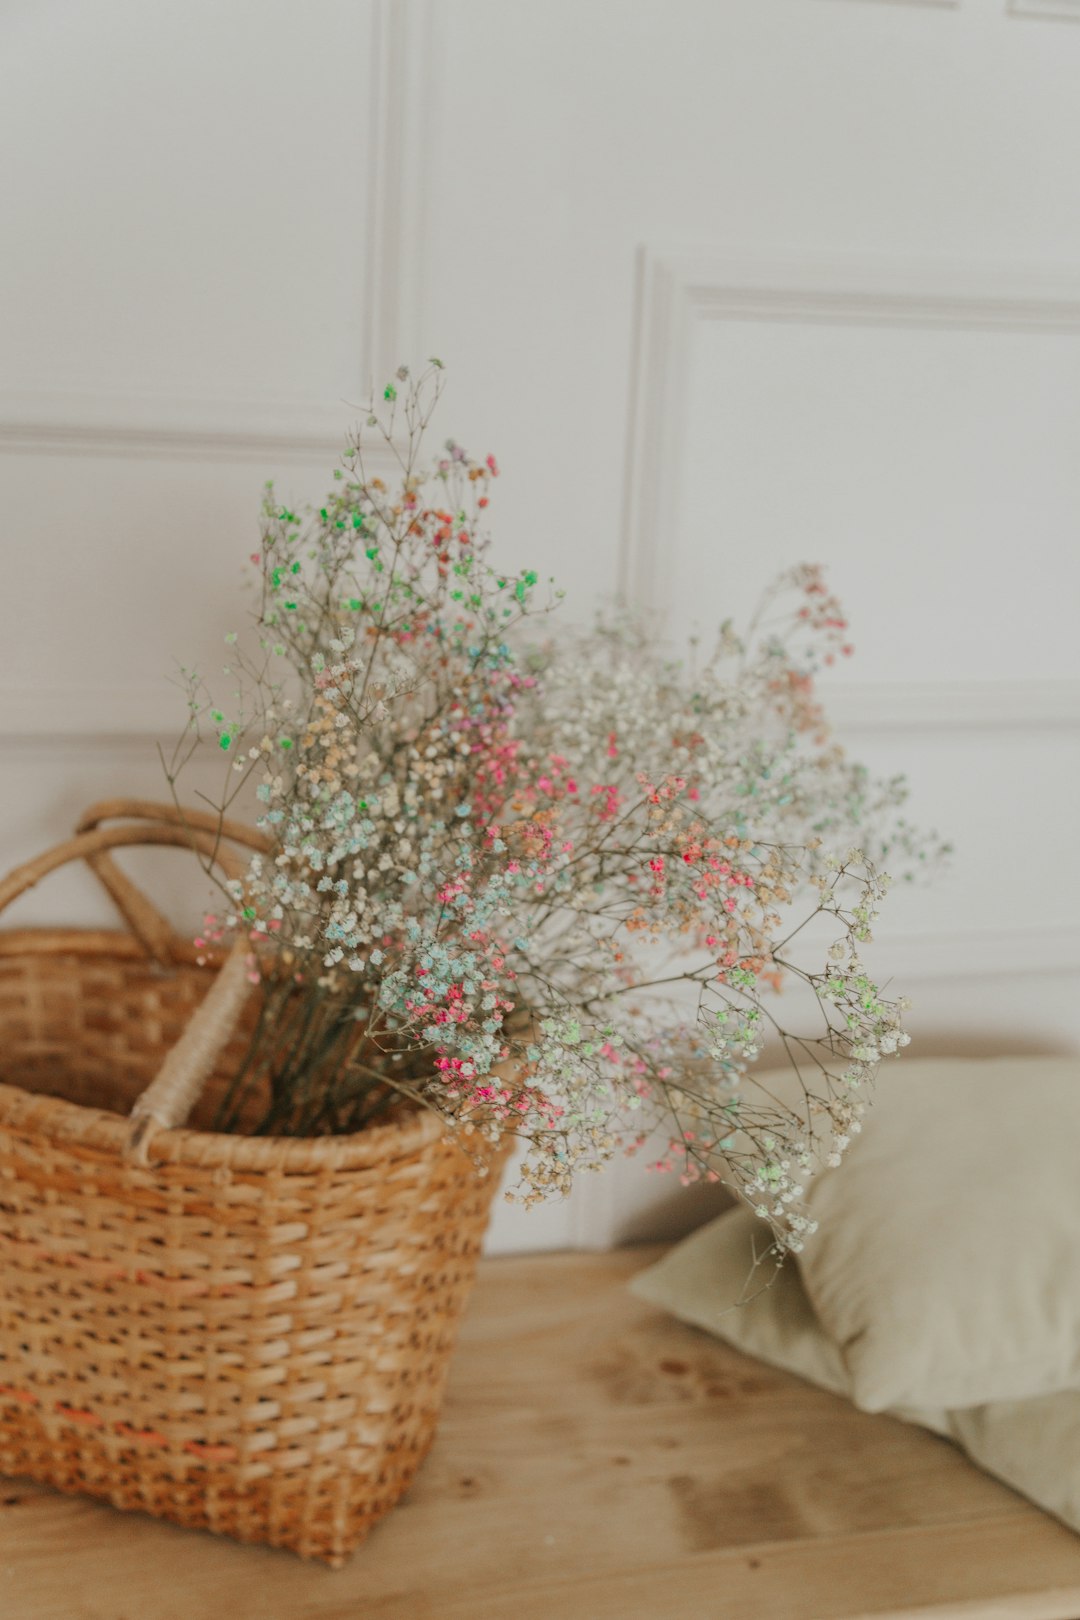 green and pink plant on brown woven basket